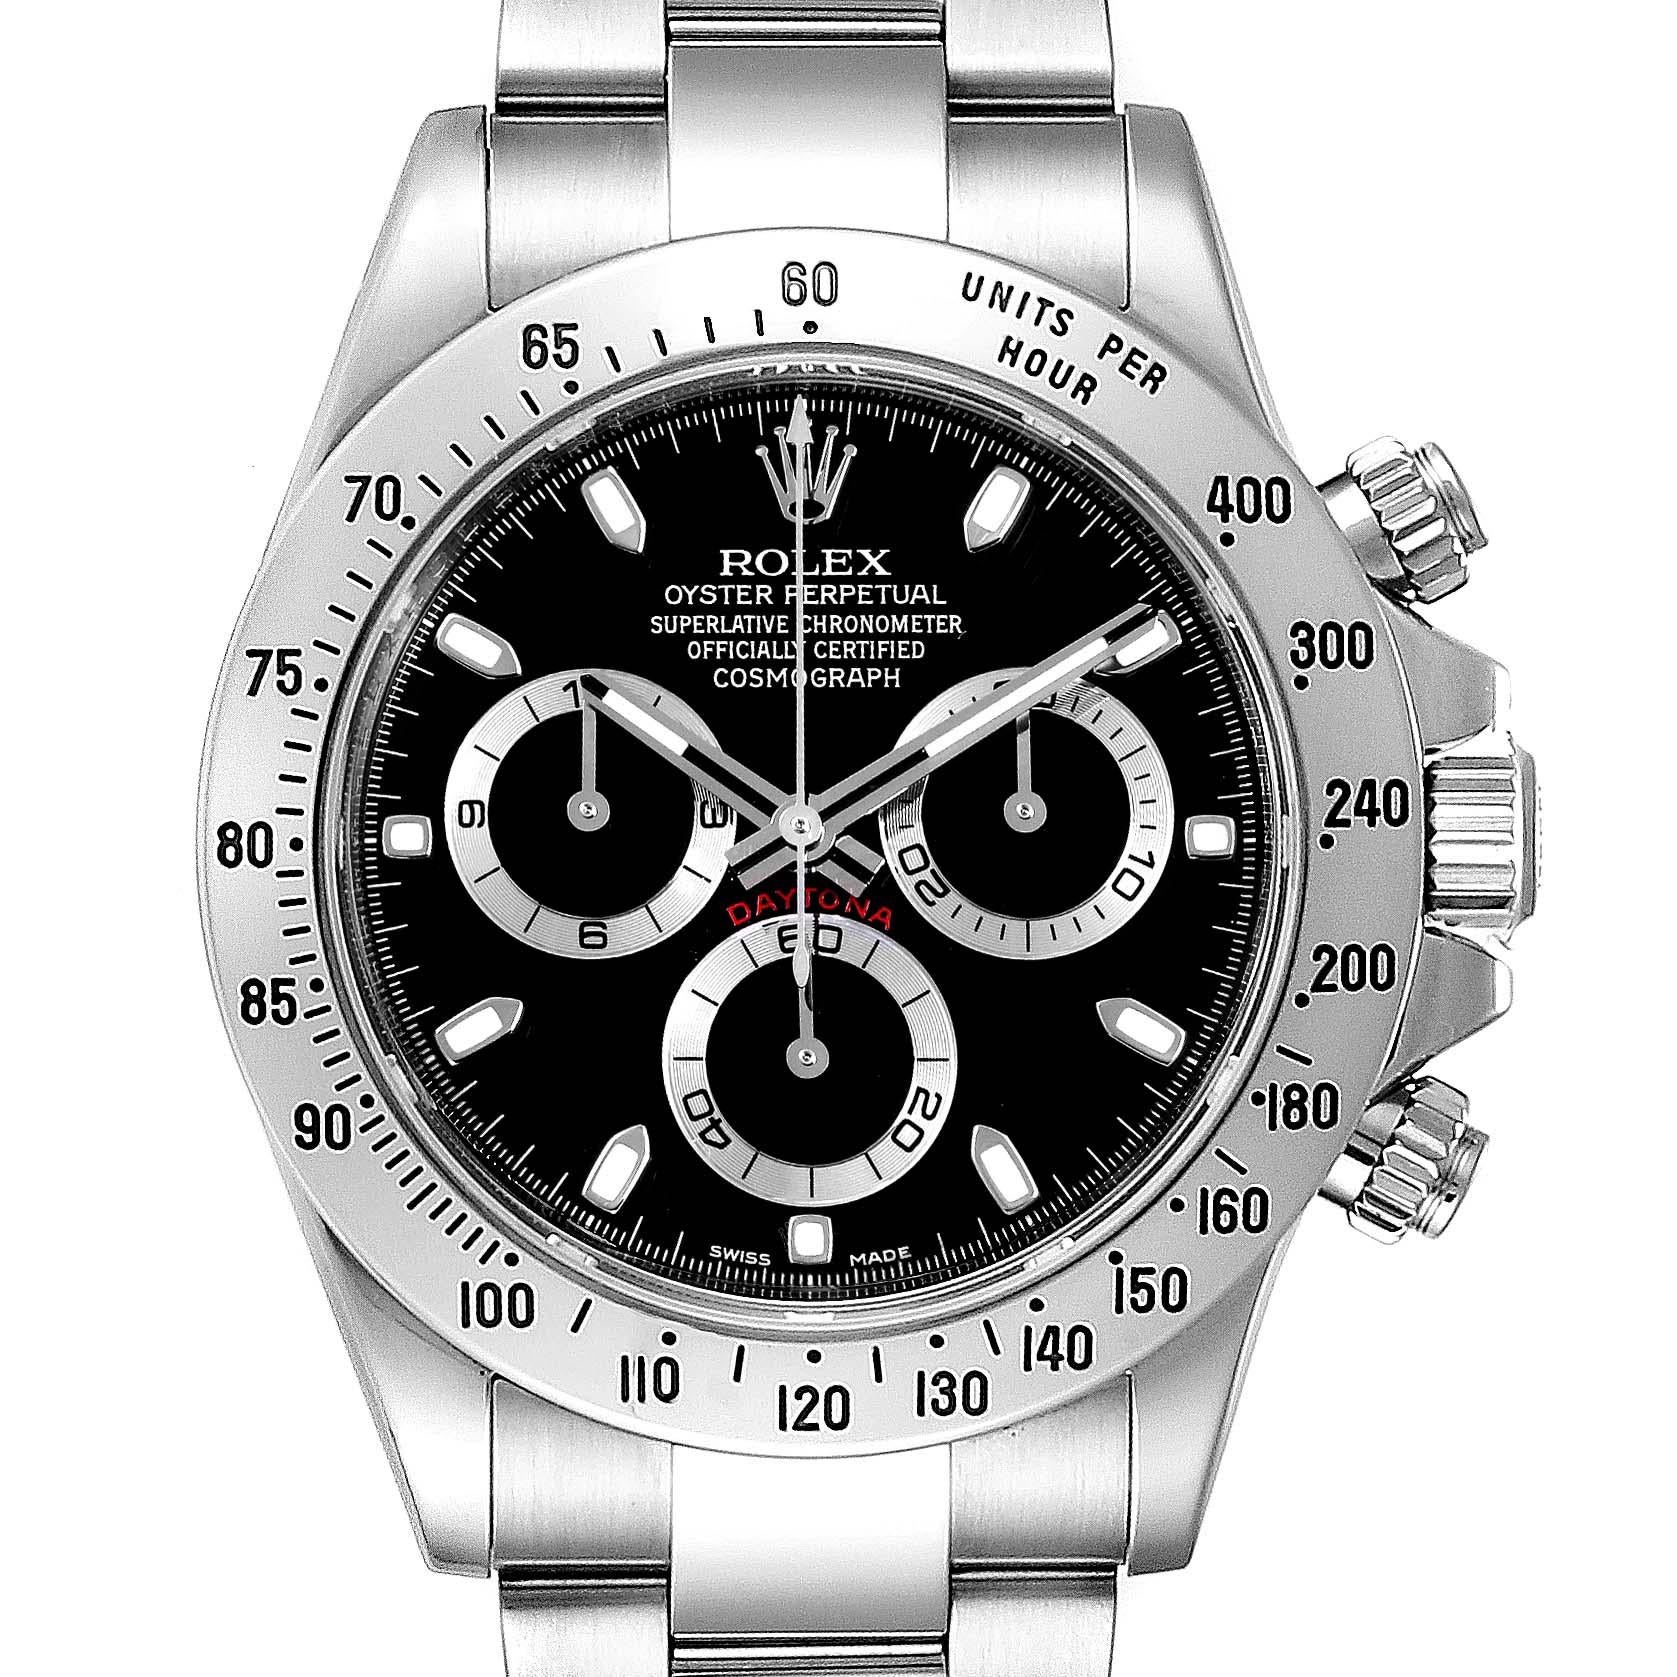 Rolex Daytona Black Dial Chronograph Stainless Steel Mens Watch 116520. Officially certified chronometer self-winding movement. Stainless steel case 40.0 mm in diameter. Special screw-down push buttons. Stainless steel tachymeter engraved bezel.